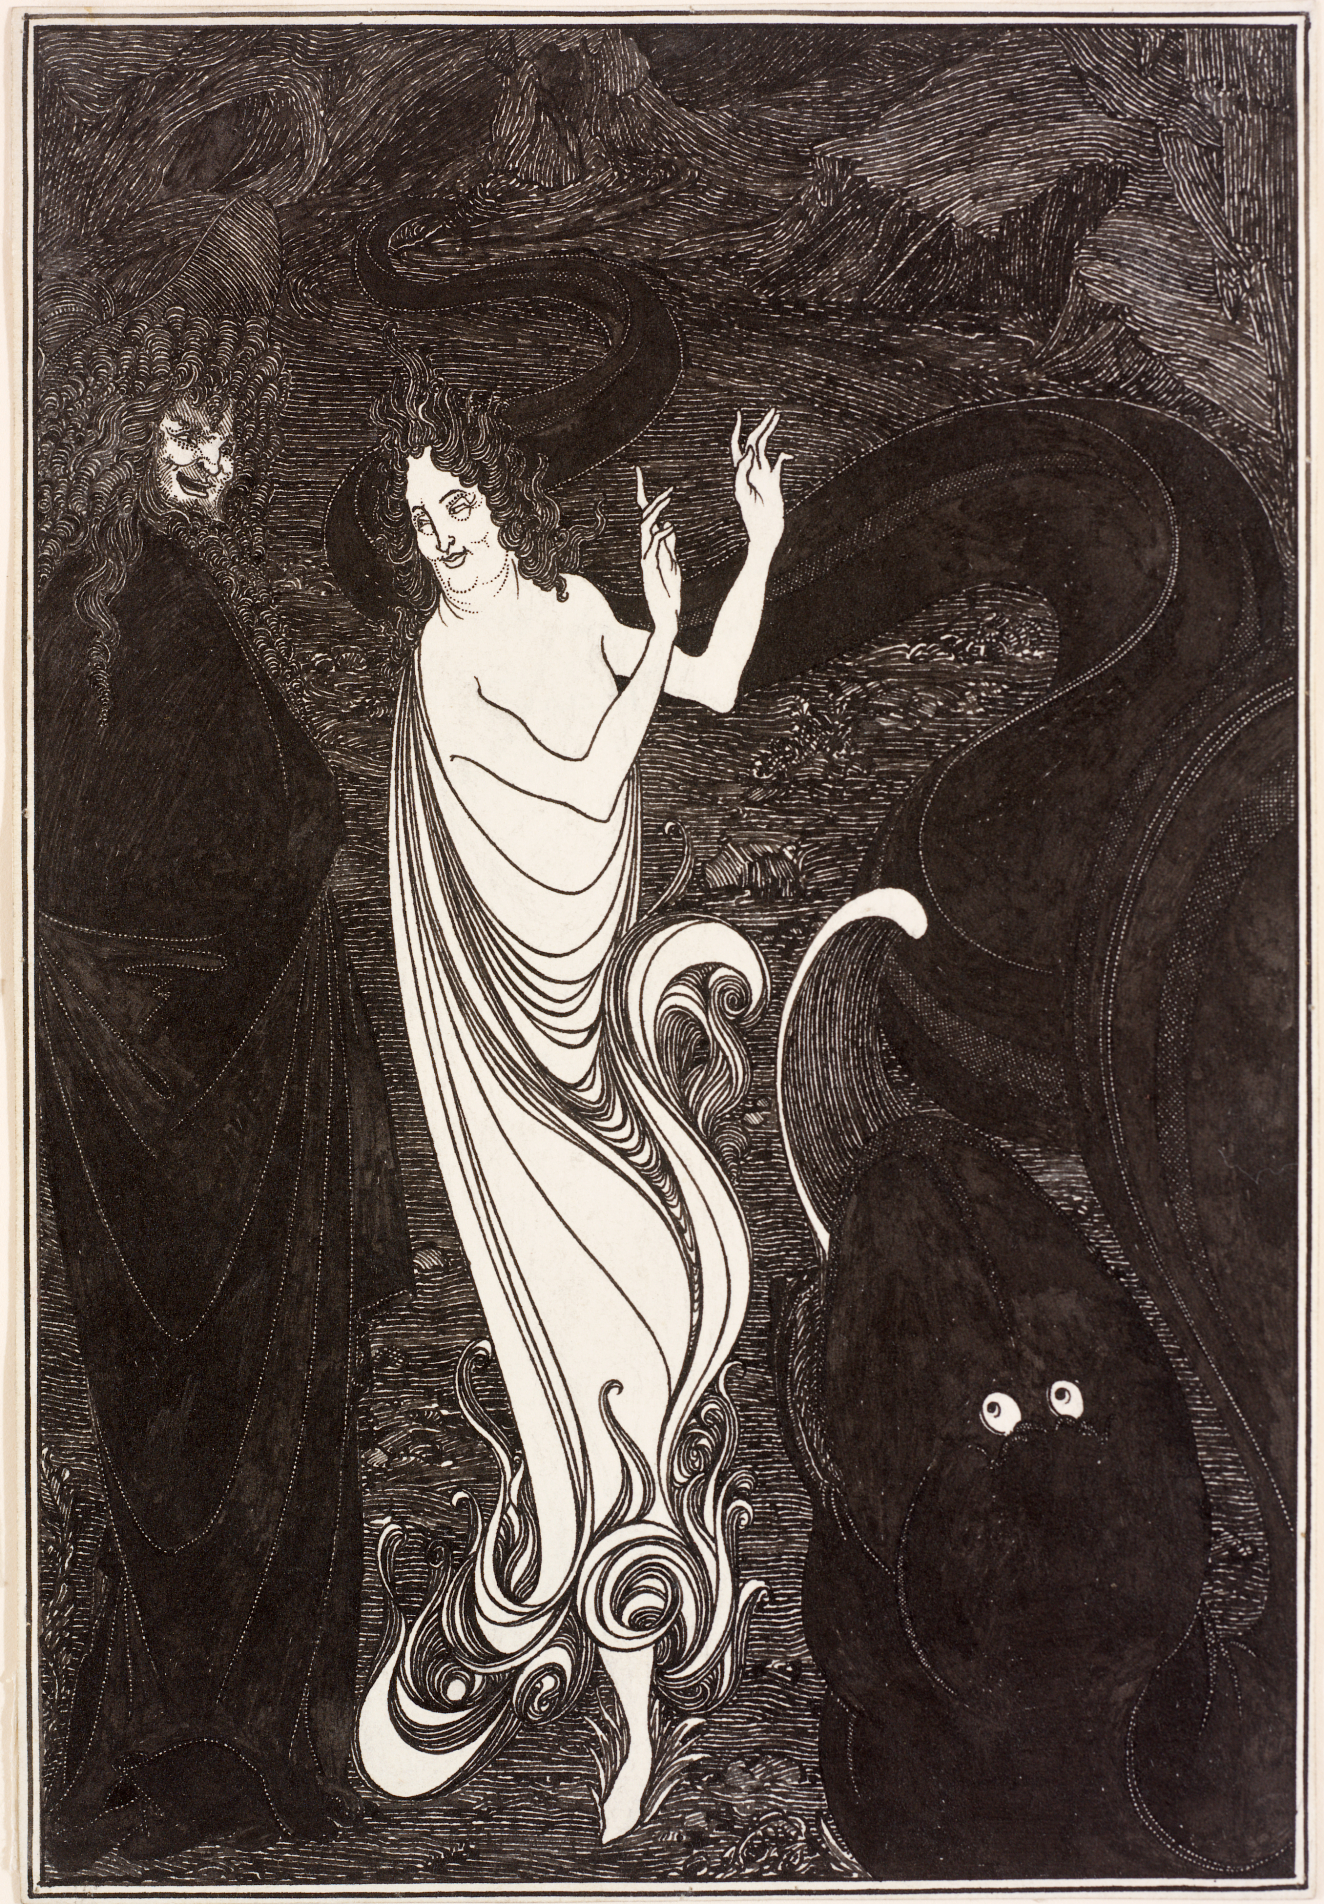 Ink drawing of two figures, one in black, the other in white. White figure mockingly turns away from  a large serpent against a dark, ominous landscape.